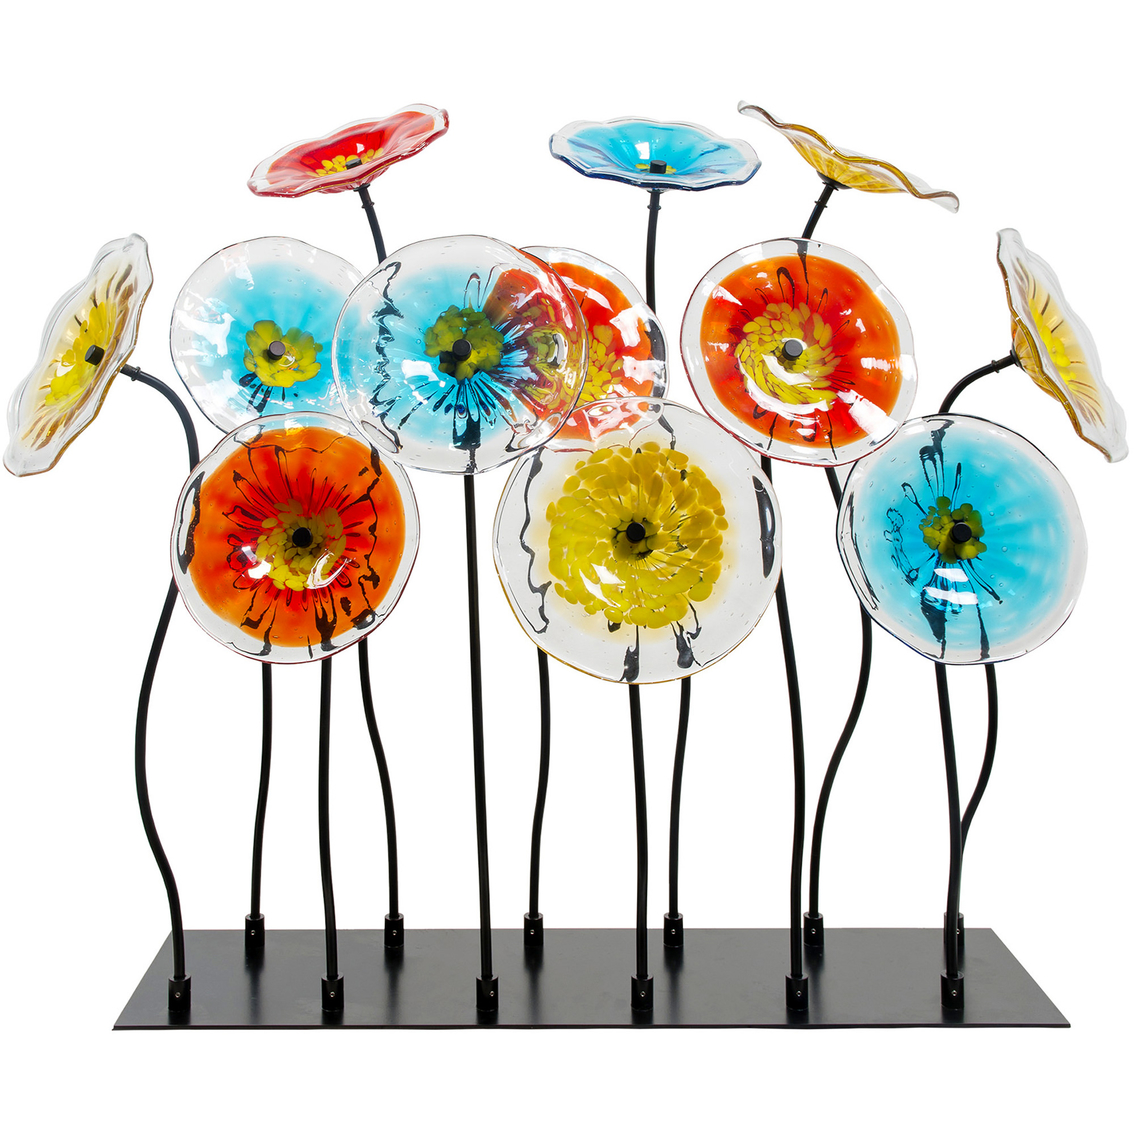 Dale Tiffany Flower Garden Art Glass Decor with Stand